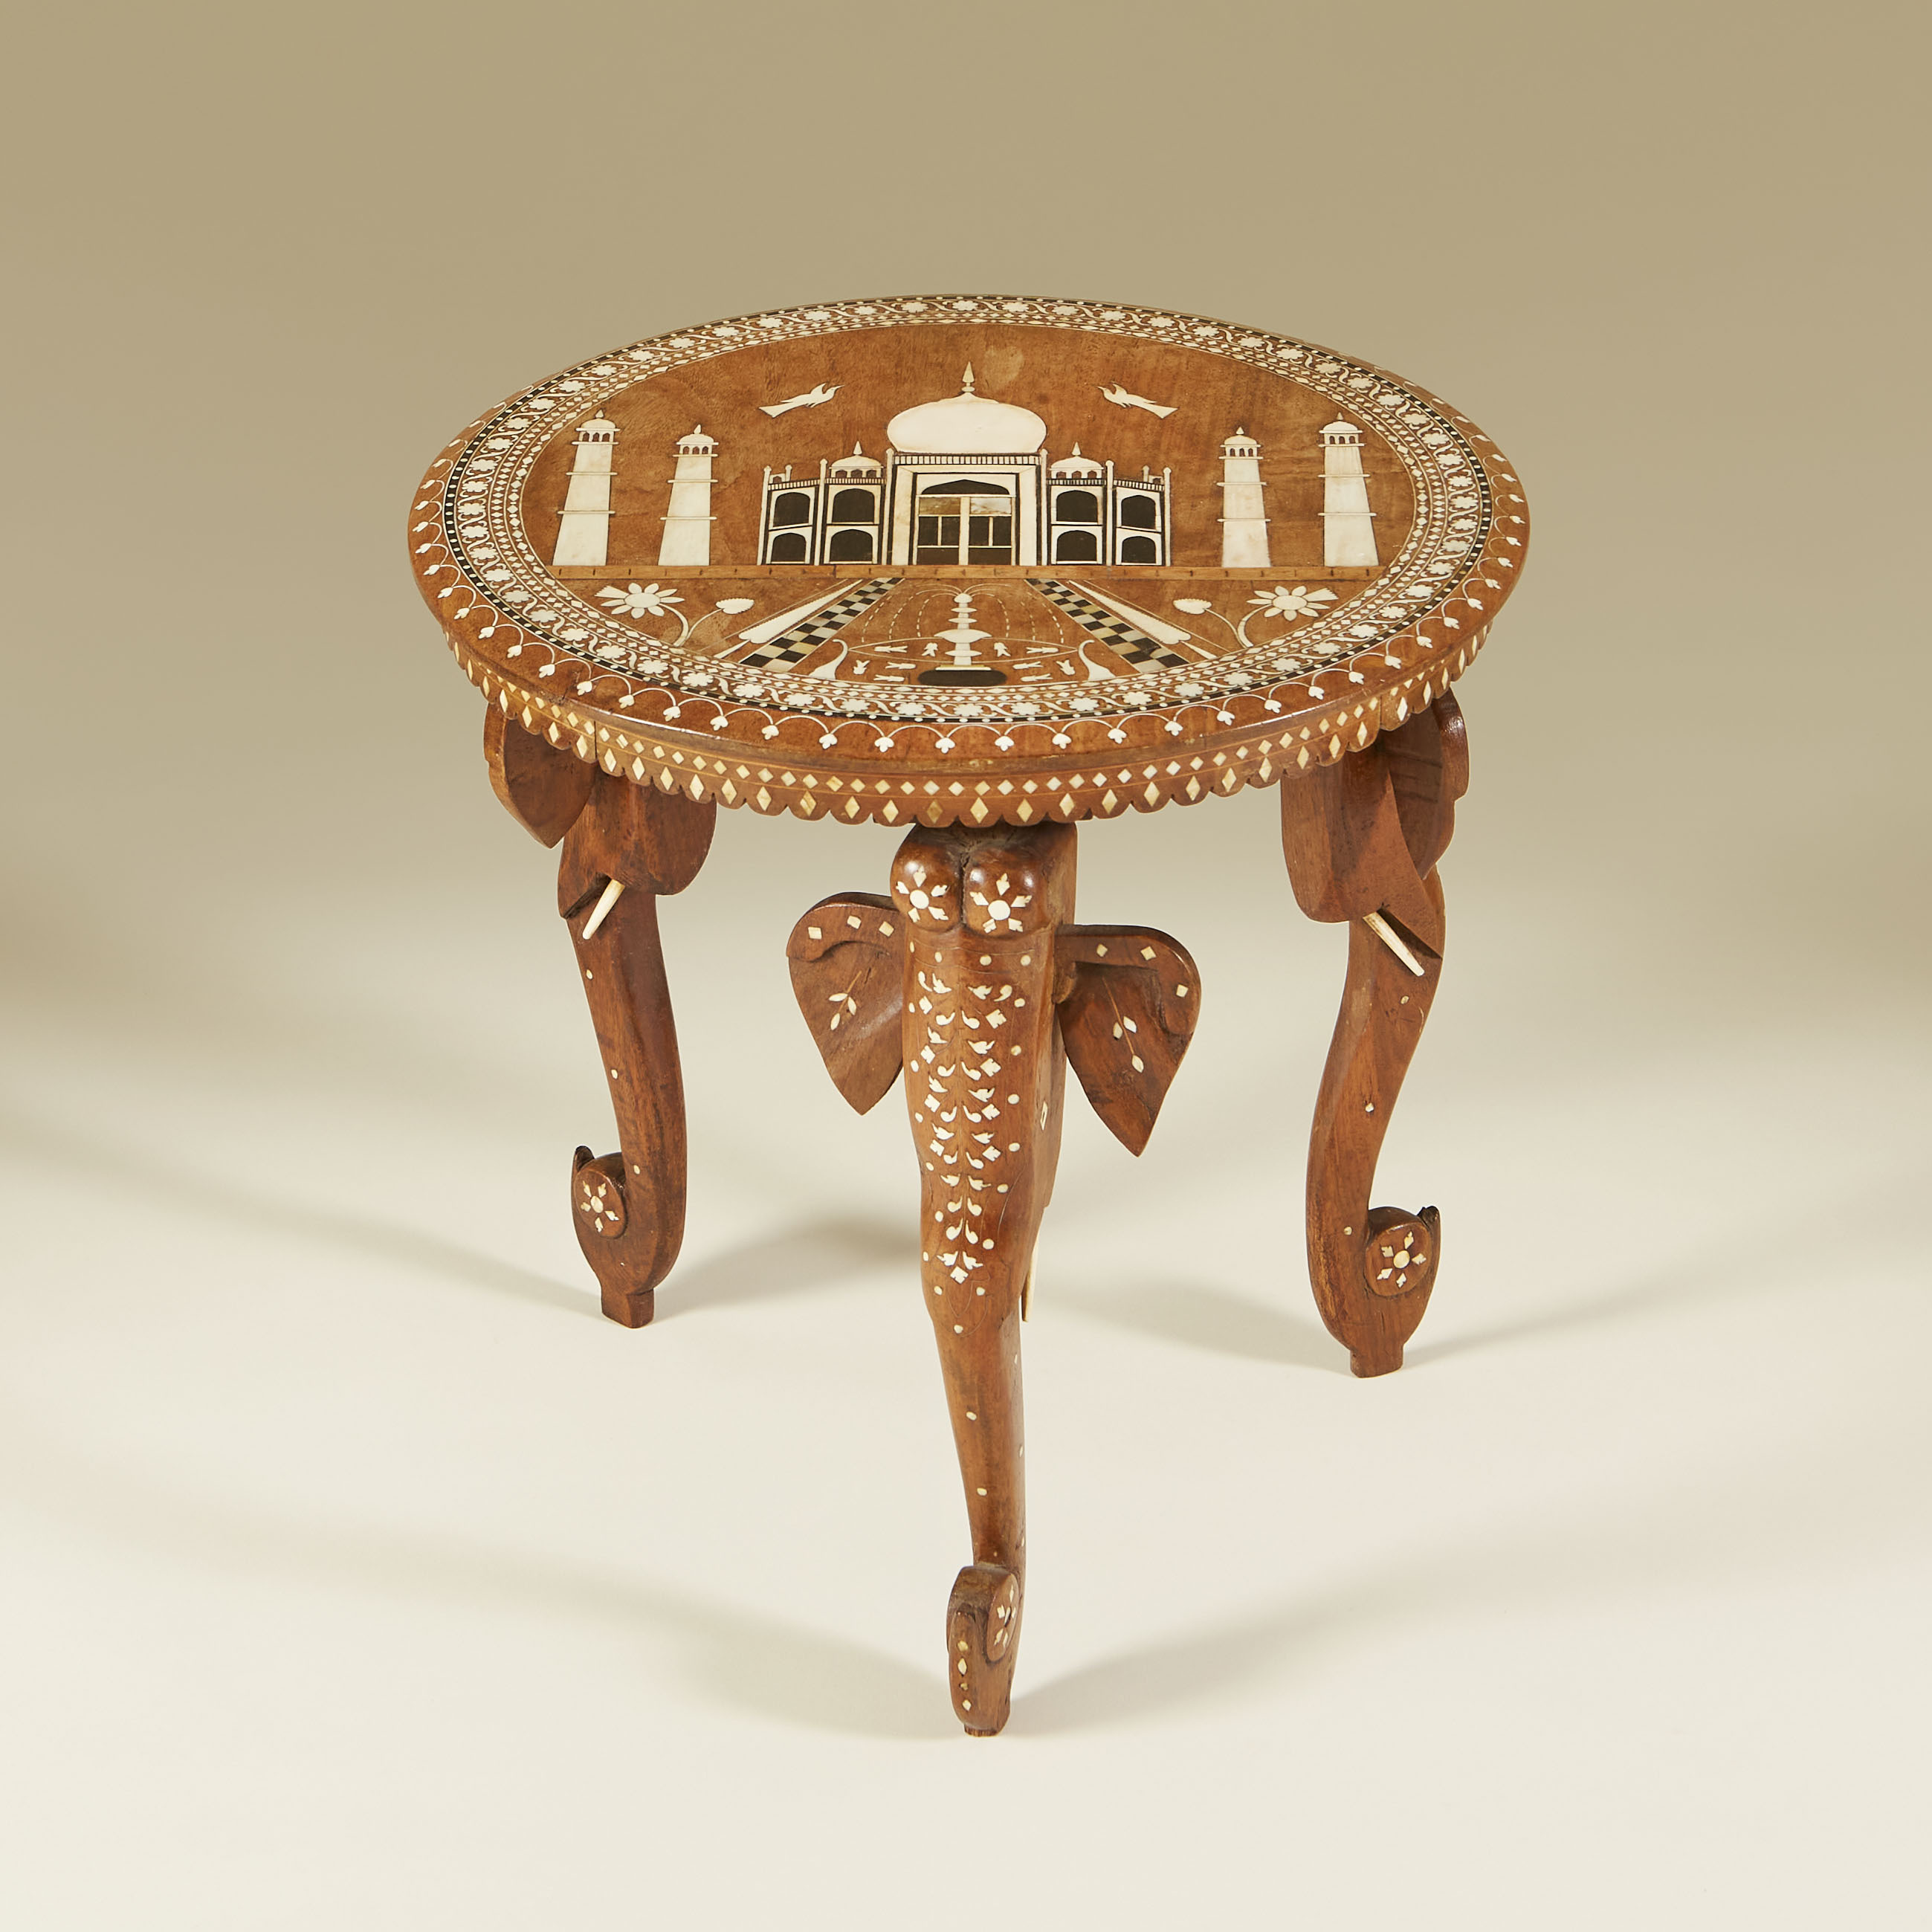 The image for Inlaid Table Circular 004 V1